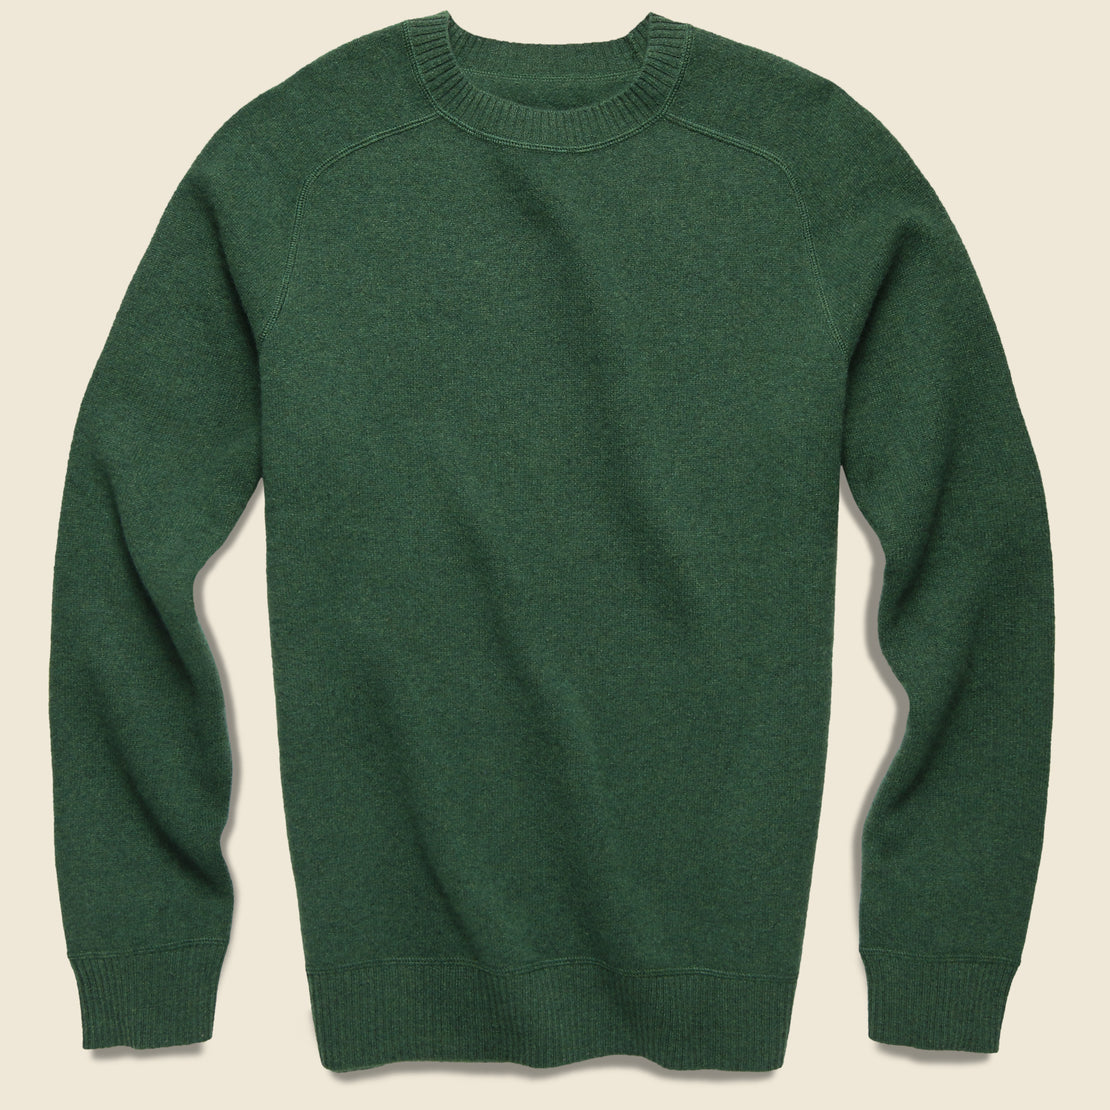 Life After Denim Columbia Cashmere Sweater - Green